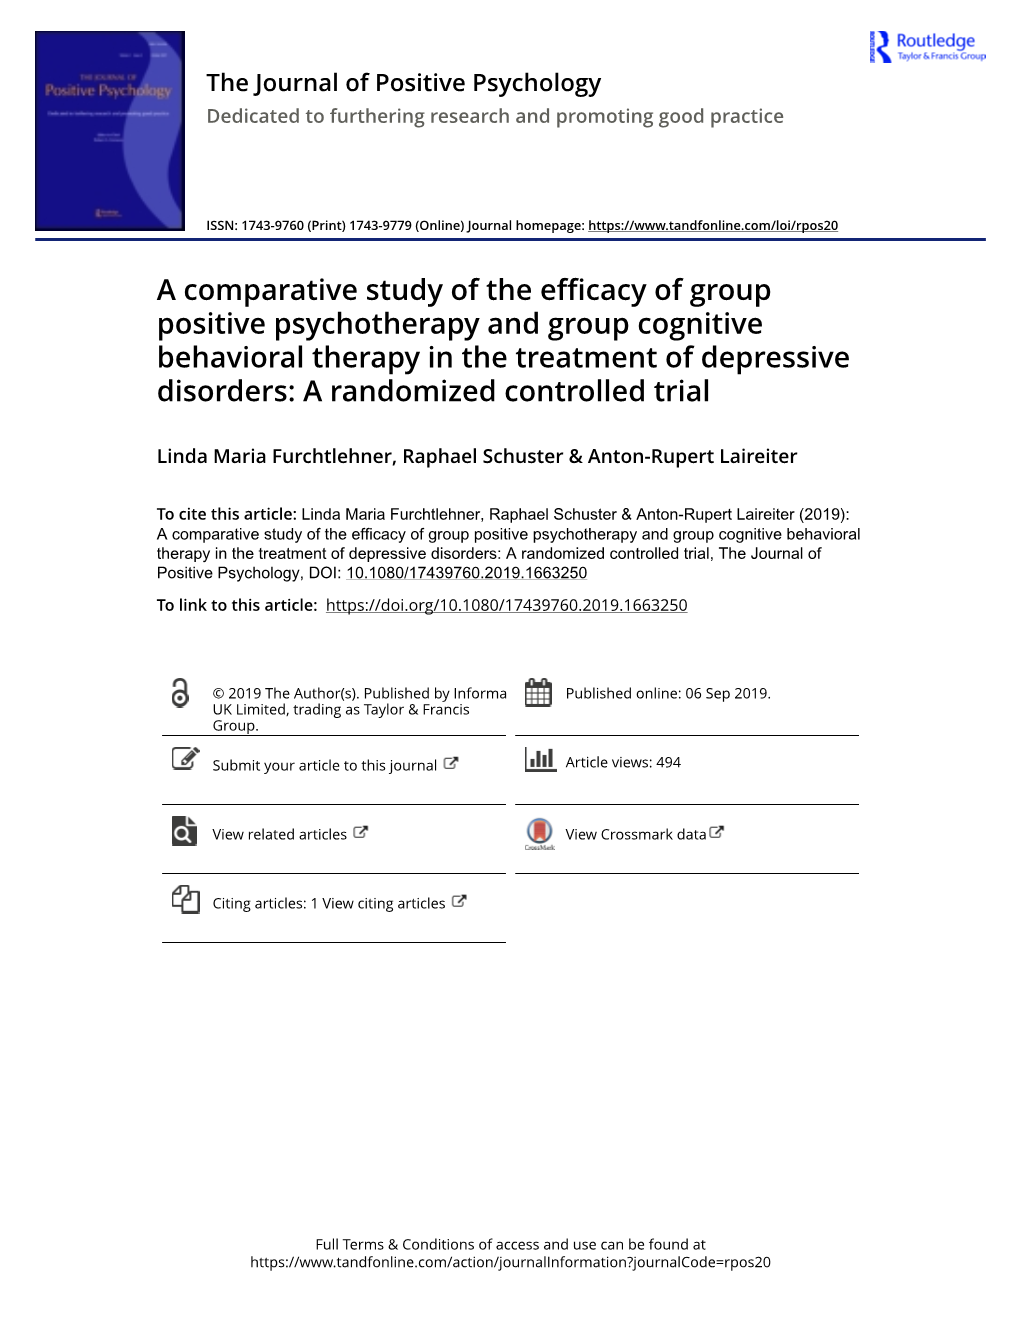 A Comparative Study of the Efficacy of Group Positive